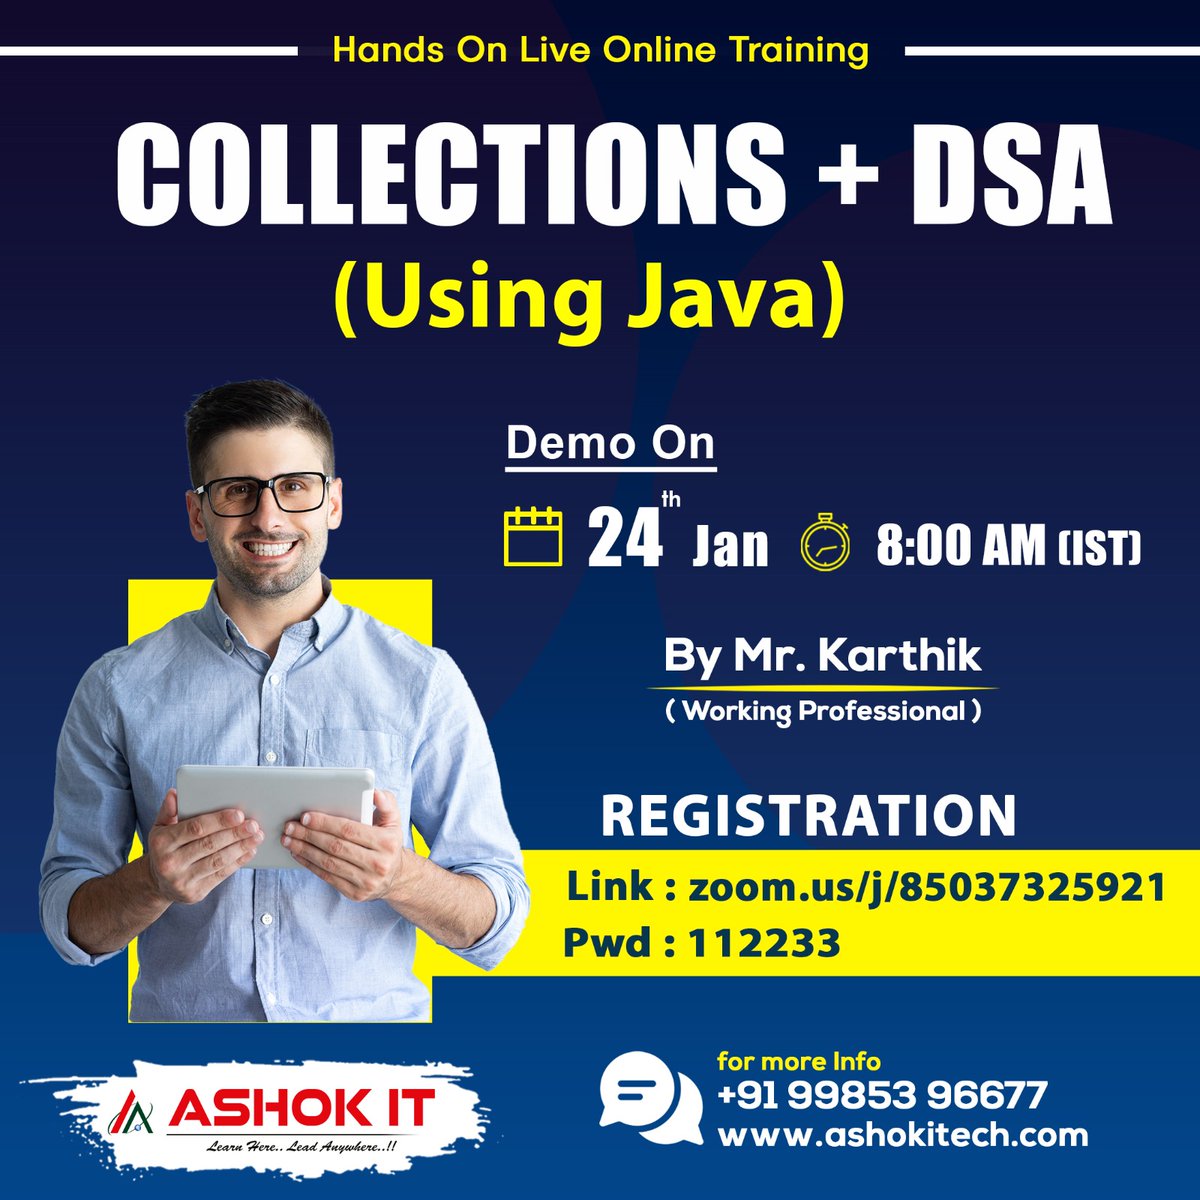 🛑 Collections + DSA (using Java) 🛑
✍️ Enroll Now : bit.ly/3OlgrXm
👉 Free Demo On 24th-Jan @ 08:00 AM IST

👉 Subscribe To Ashok IT YouTube Channel For Free Tutorials : bit.ly/41IHJdj

#datastructureandalgorithm #DSA #collections #datastructures #ashokit